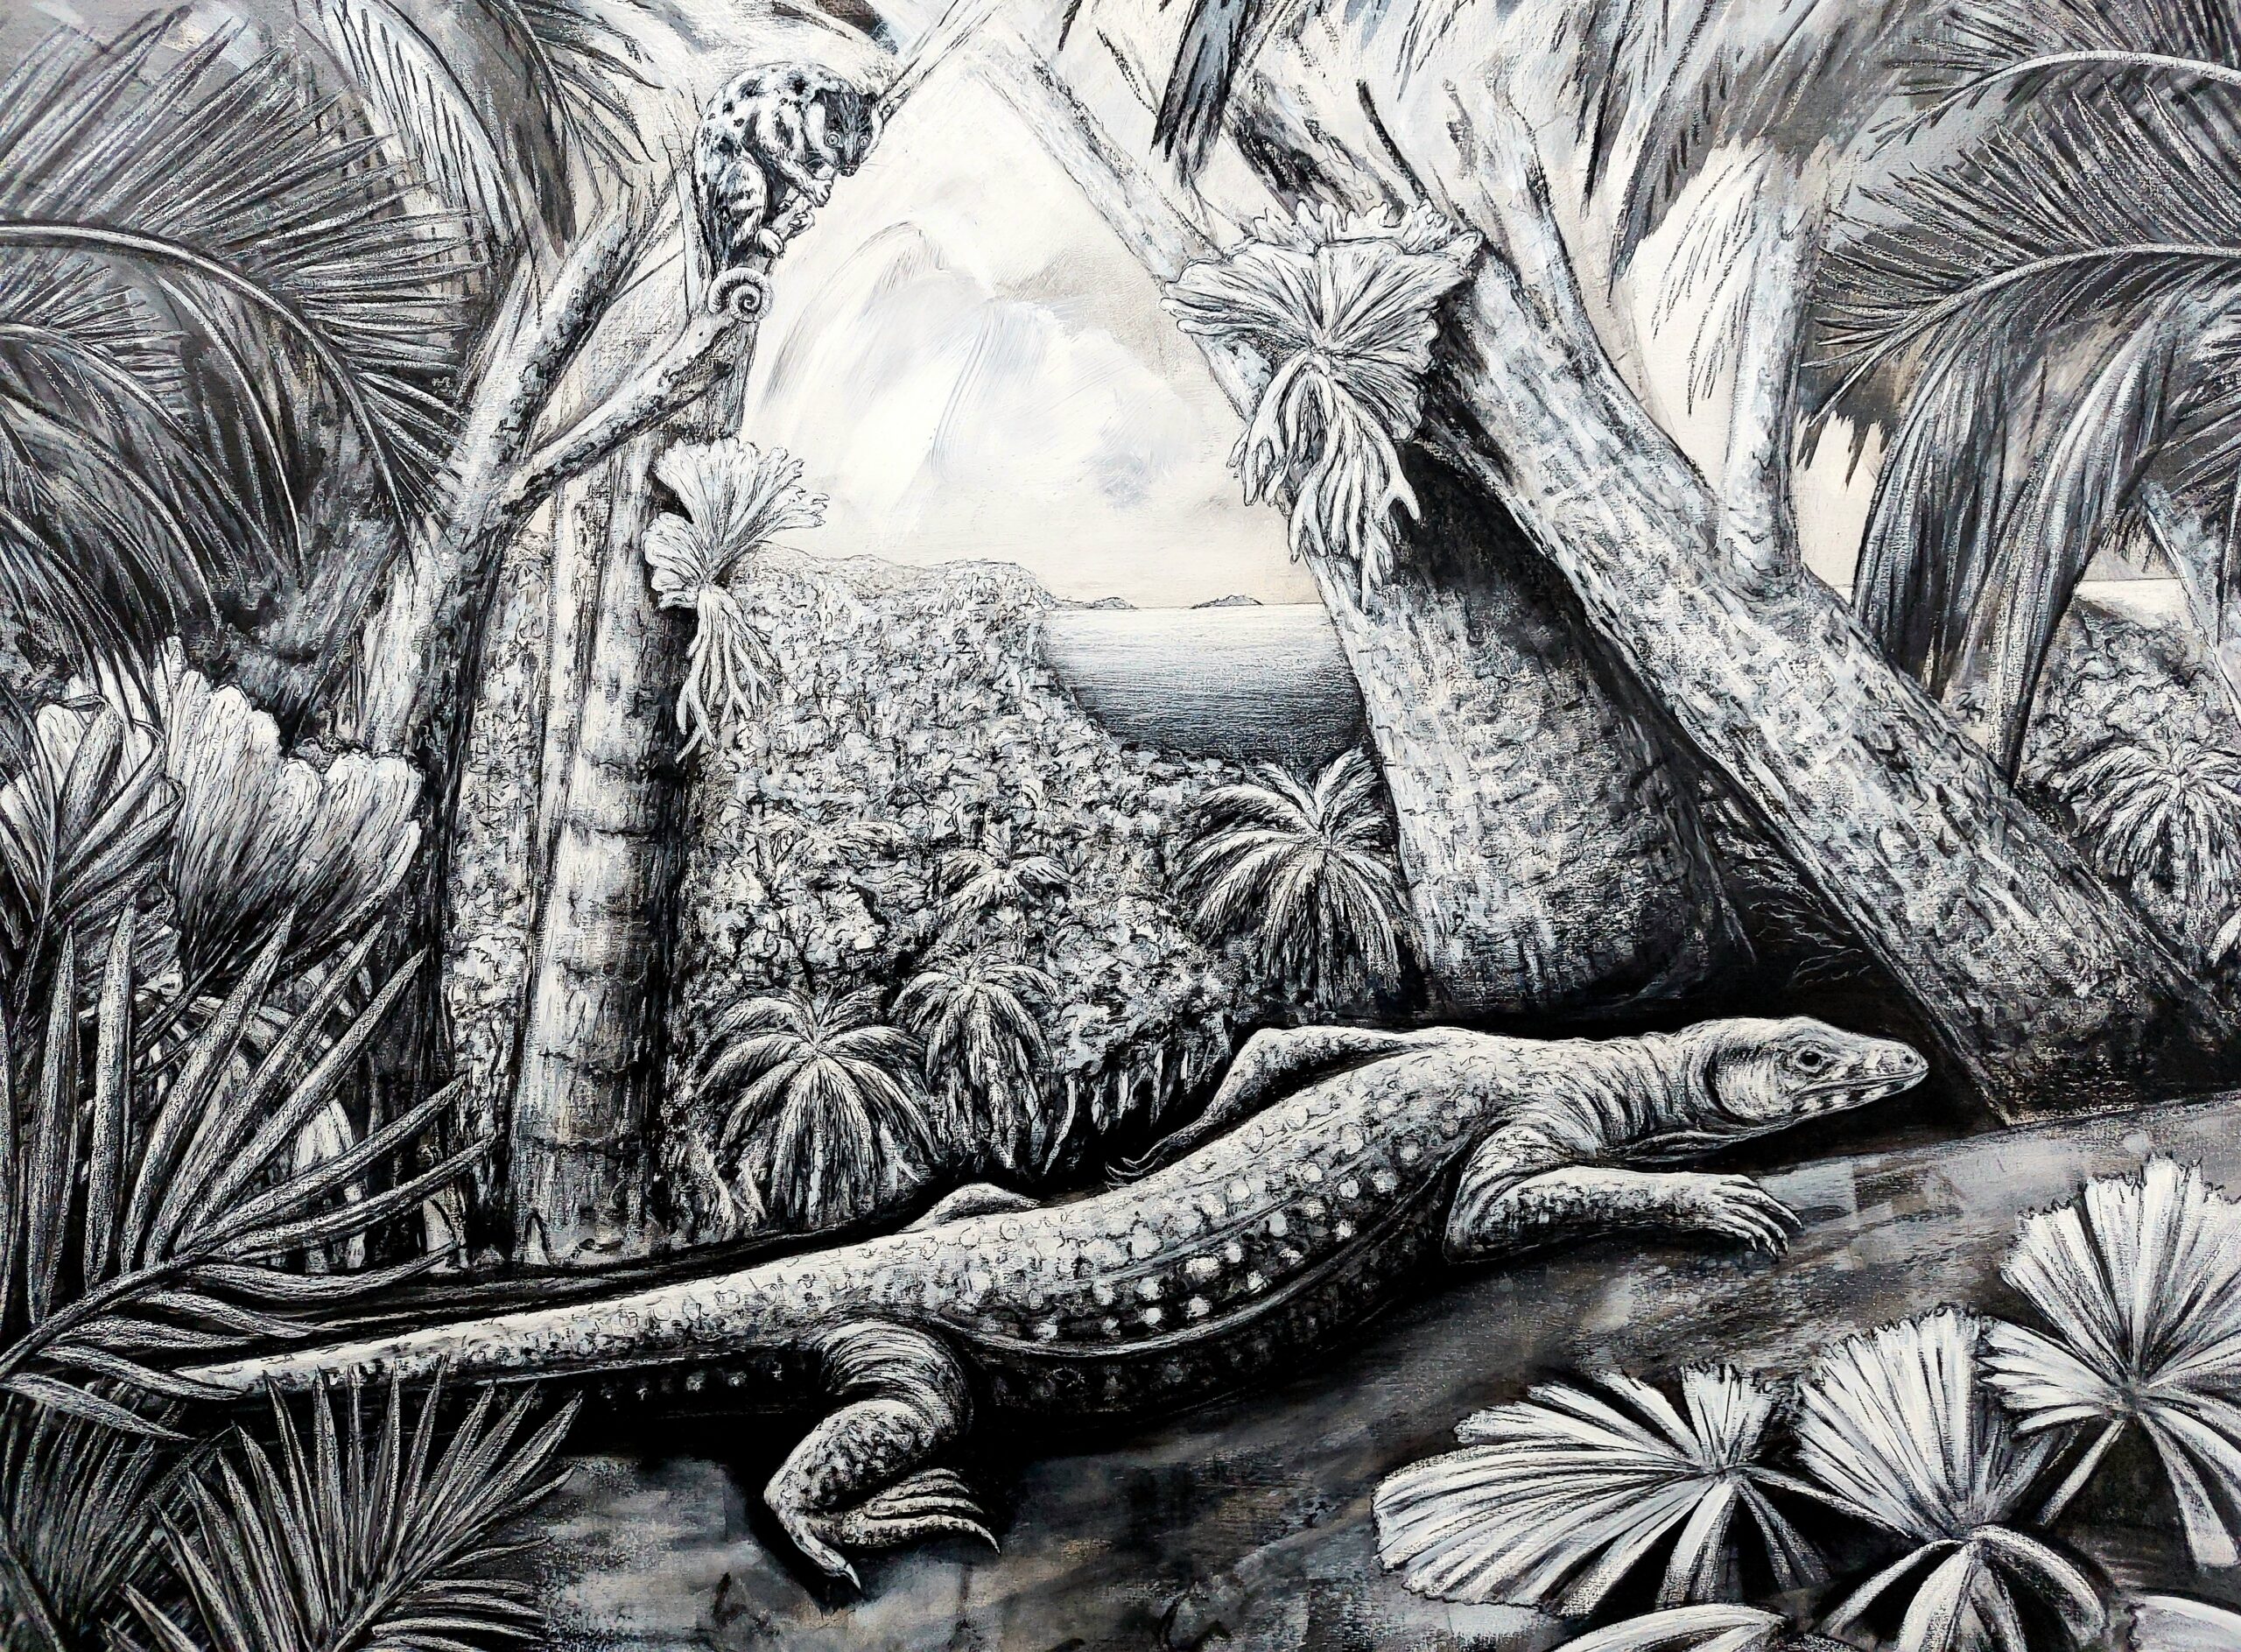 The Daintree, 2021. Charcoal, chalk and gesso on canvas. 120 x 150 cm.